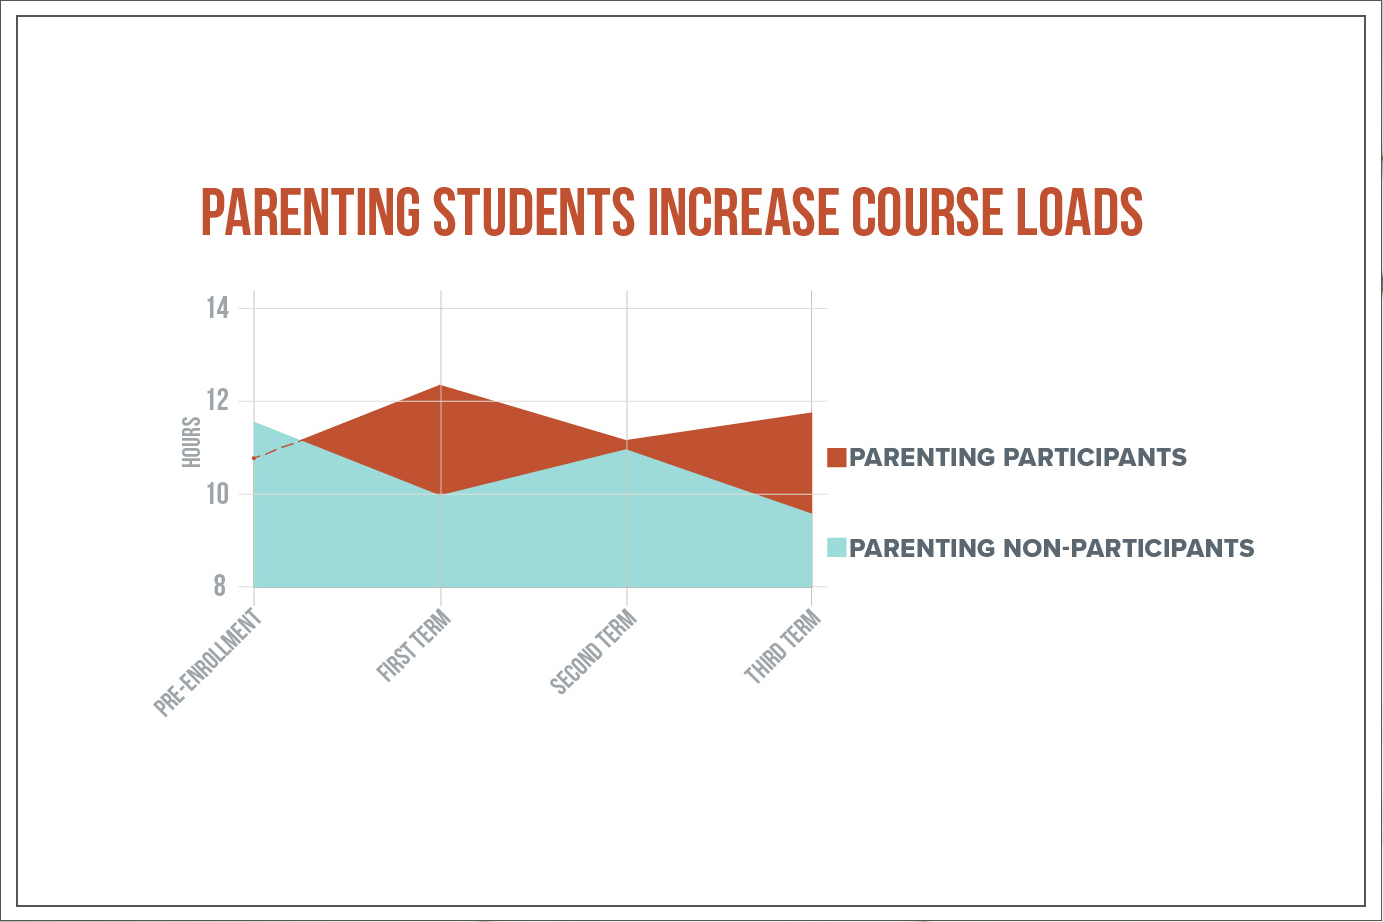 Parenting students increase course loads chart